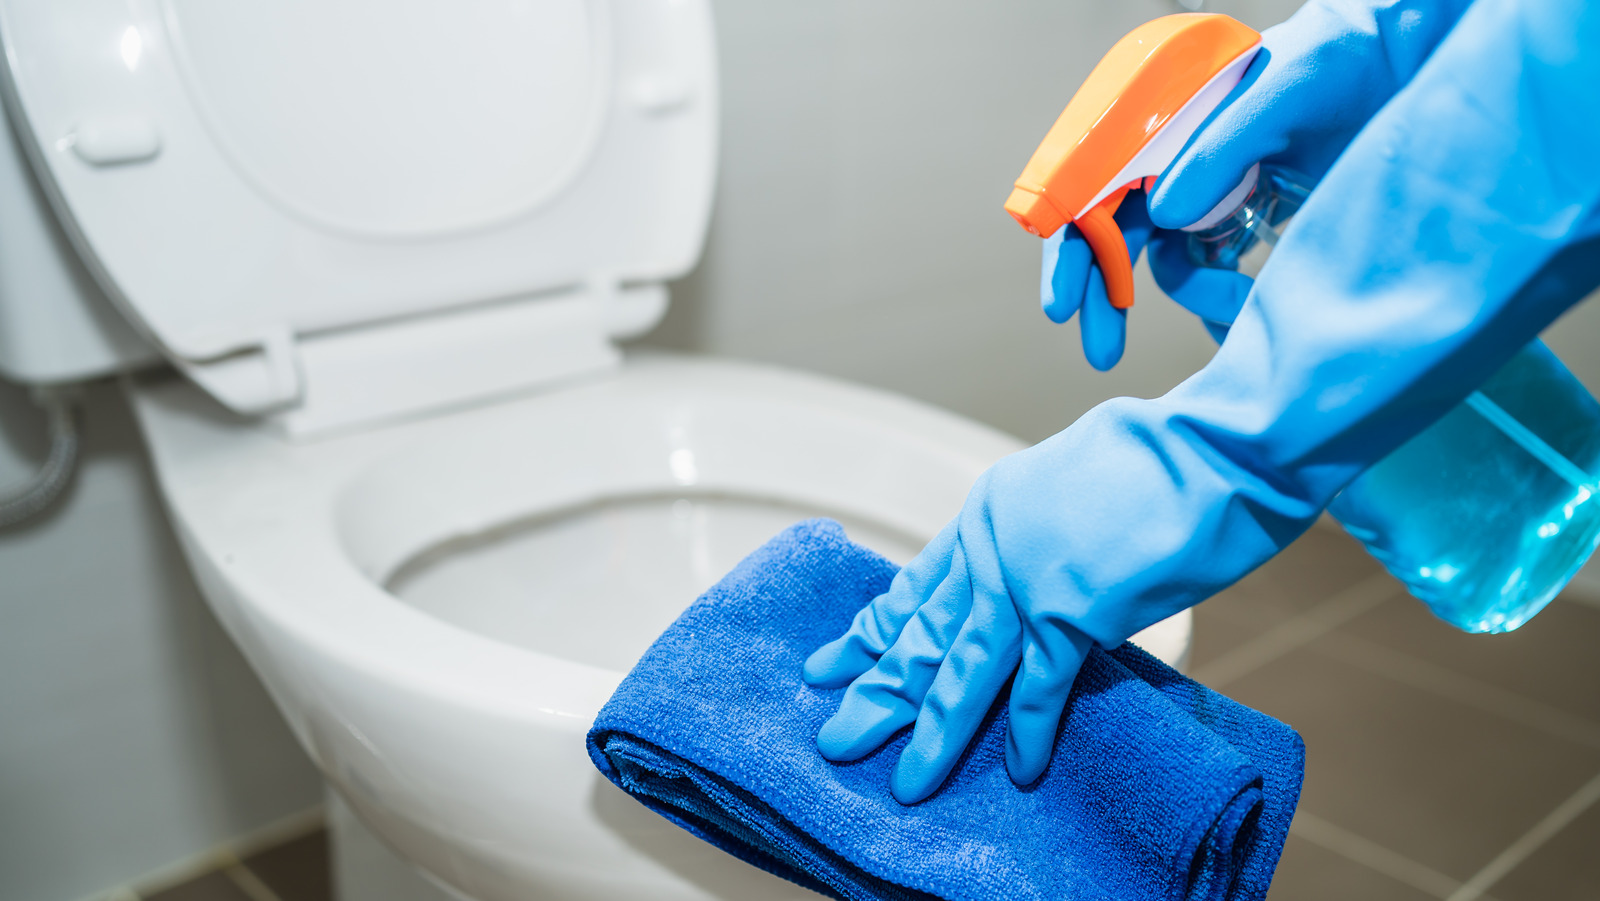 How To Clean a Dirty Toilet with Coca-Cola